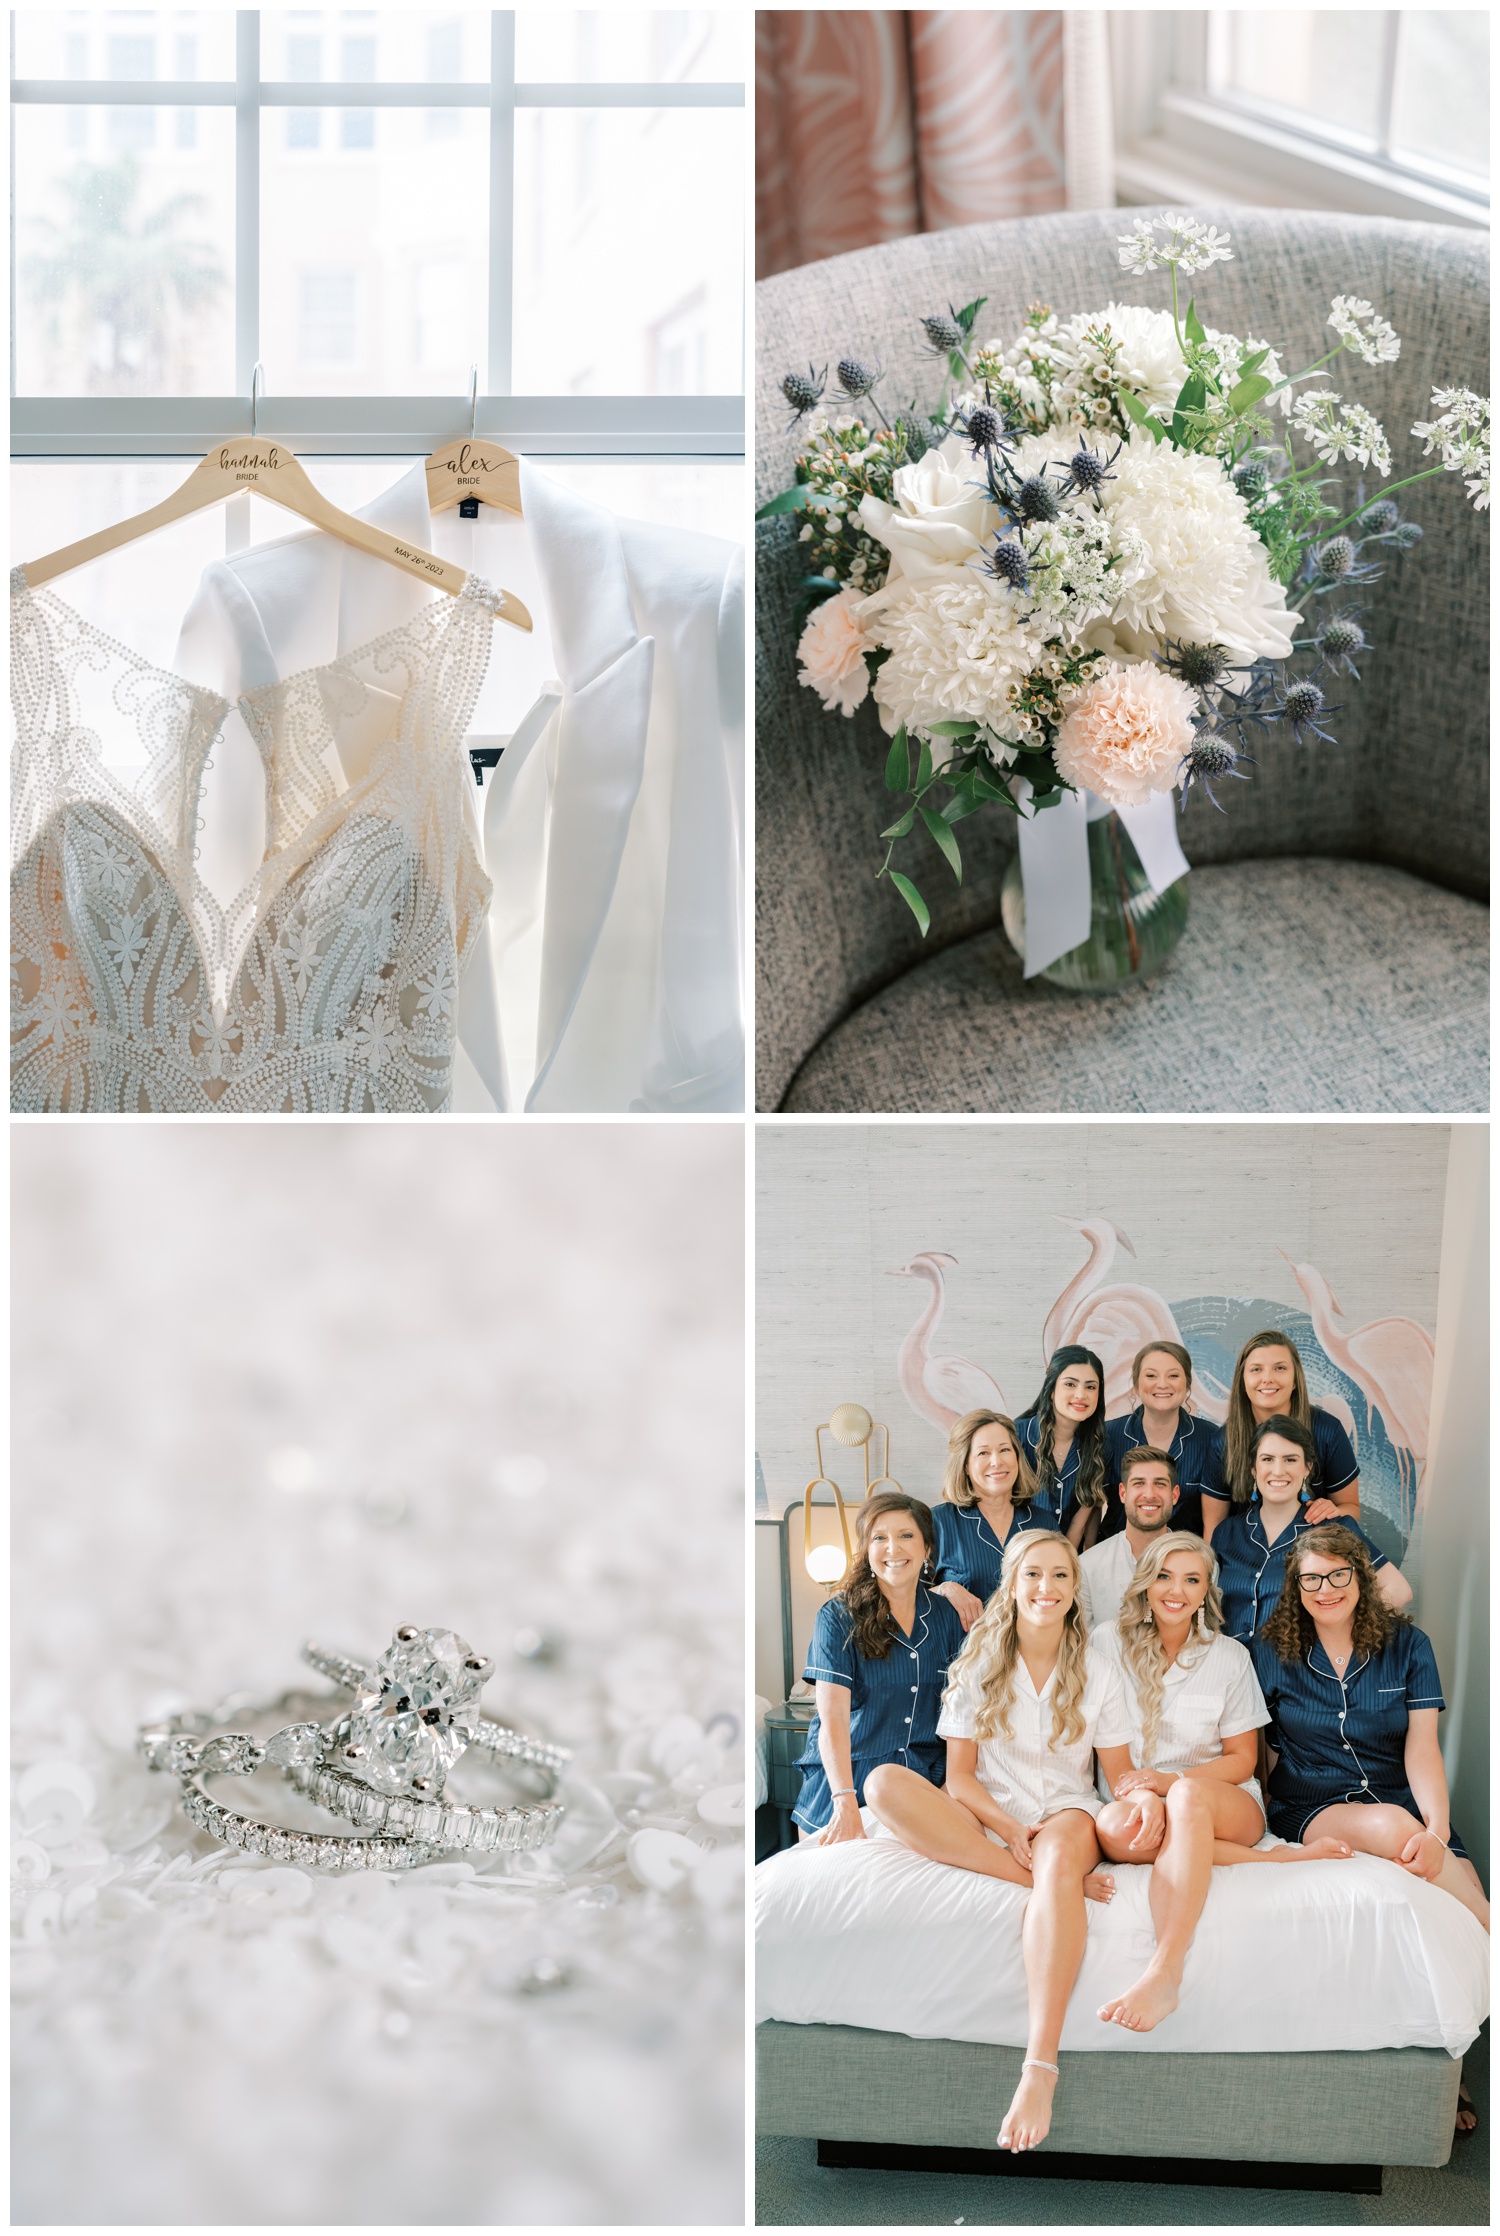 Getting ready photos - stephanie lanni photography, arms of persephone florals, lasting luxe artistry hair and makeup, st pete elopement package